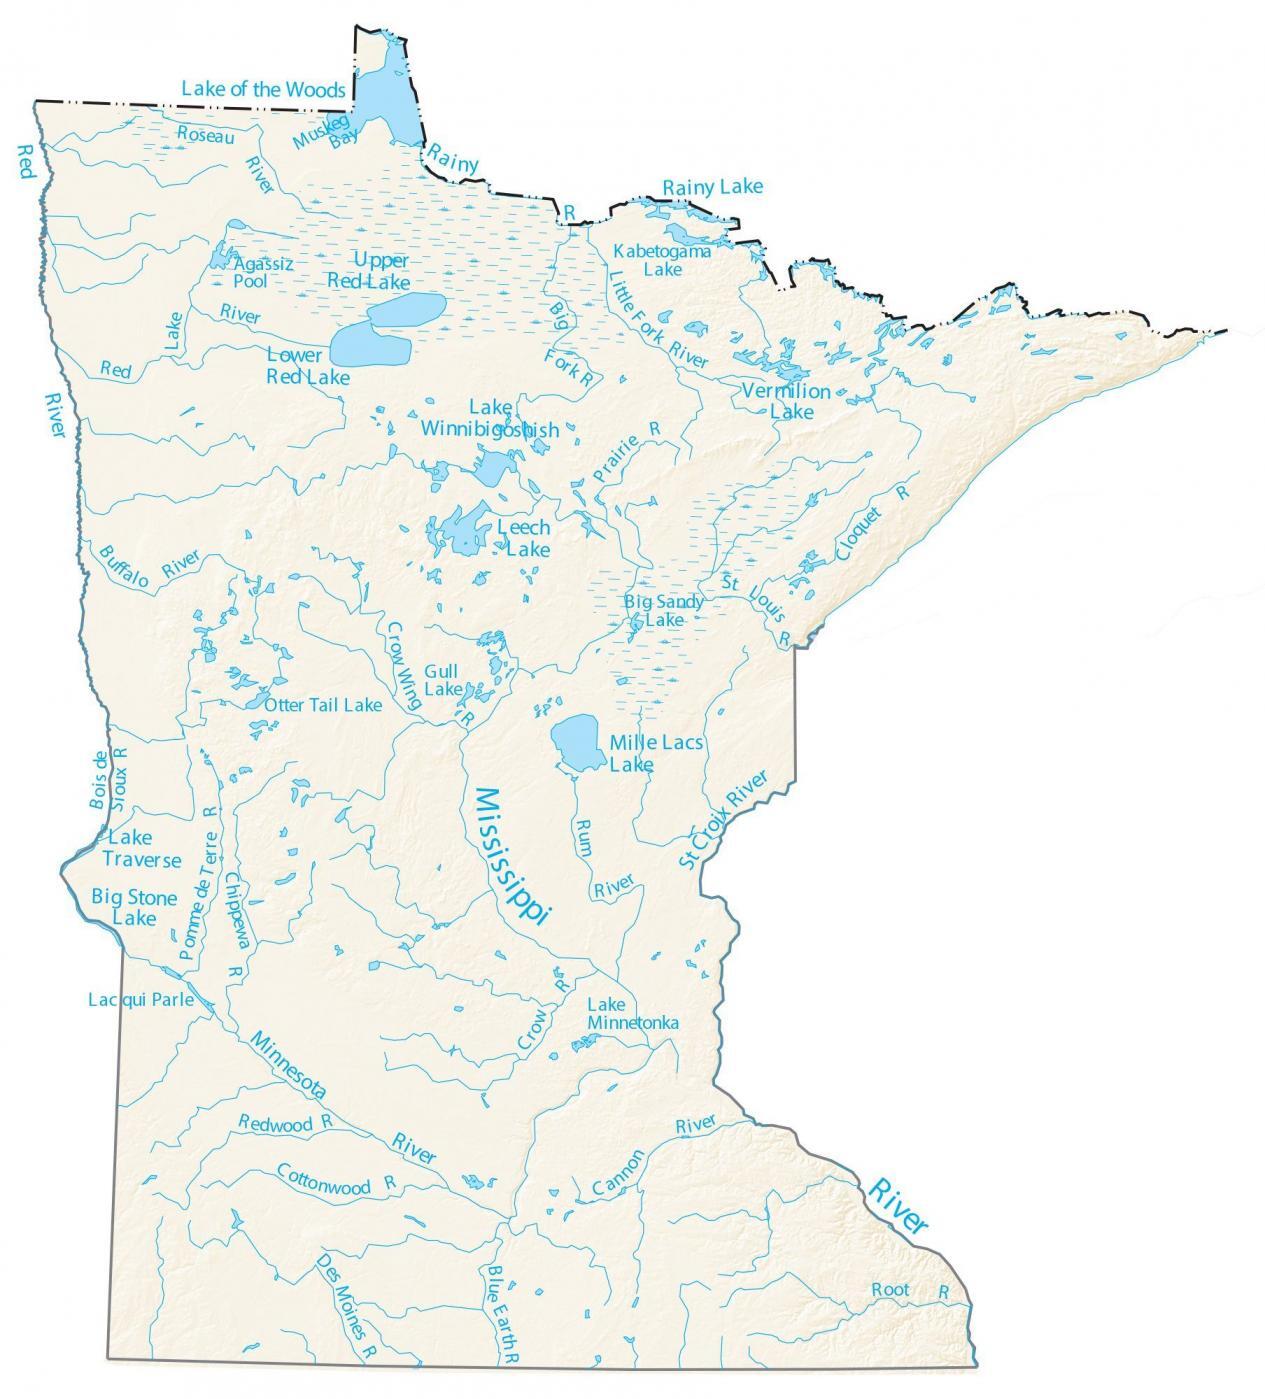 map-of-minnesota-cities-and-roads-gis-geography